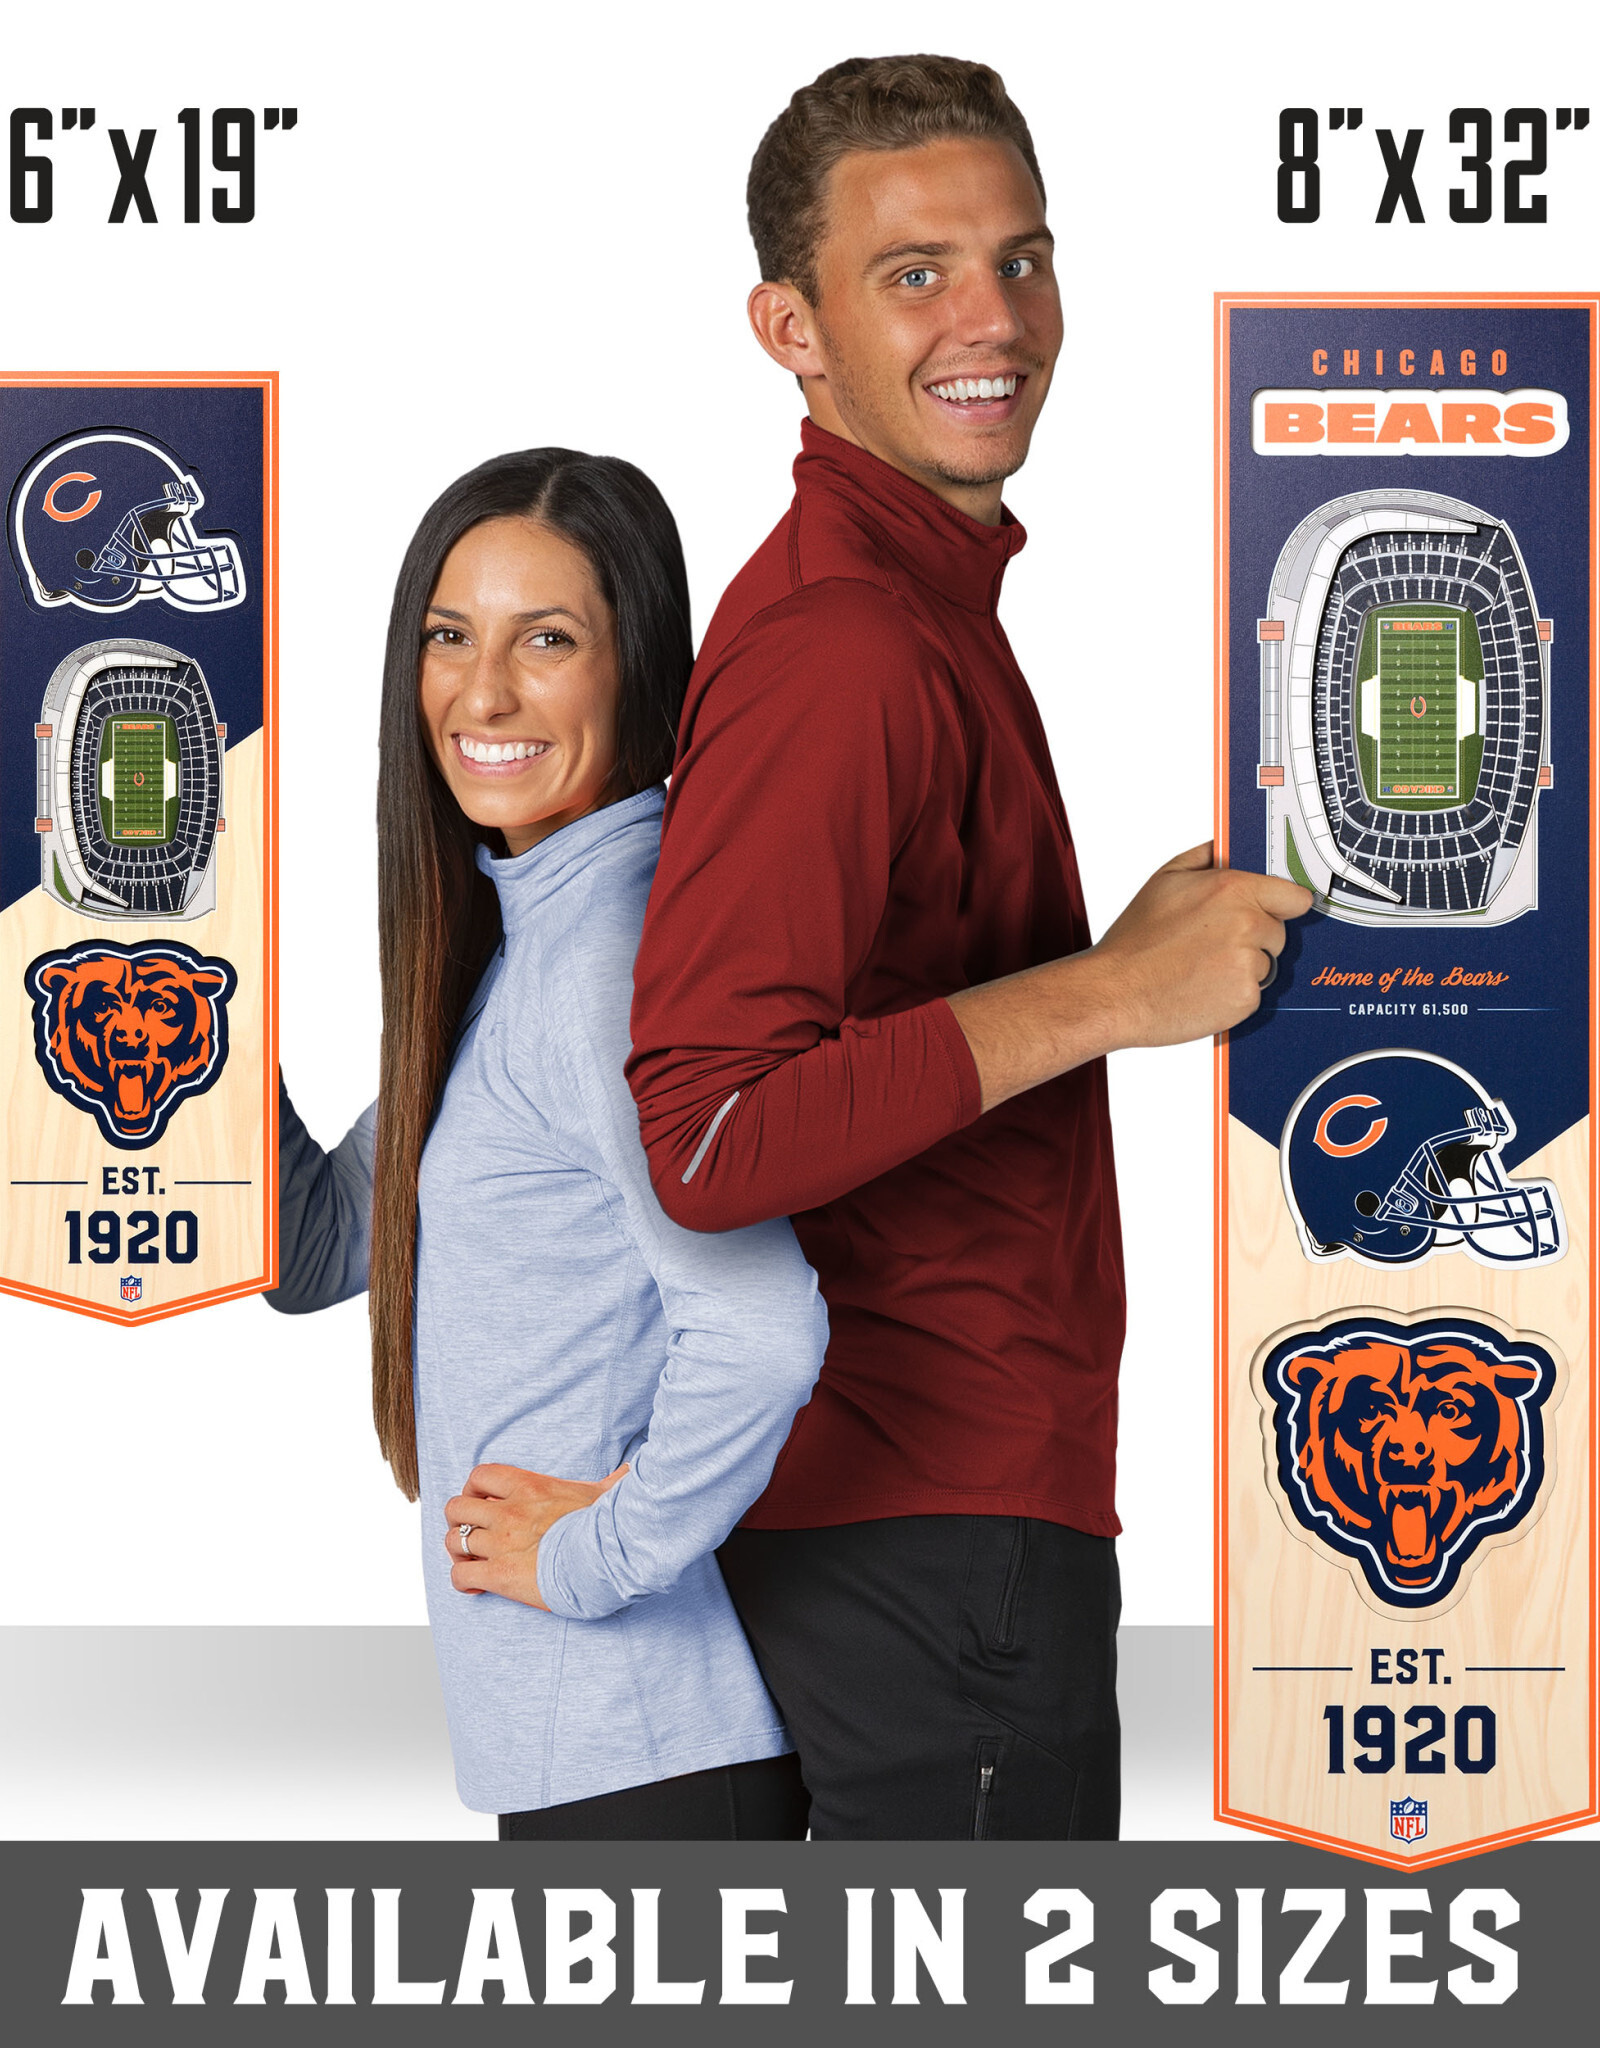 YOU THE FAN Chicago Bears 3D StadiumView 8x32 Banner